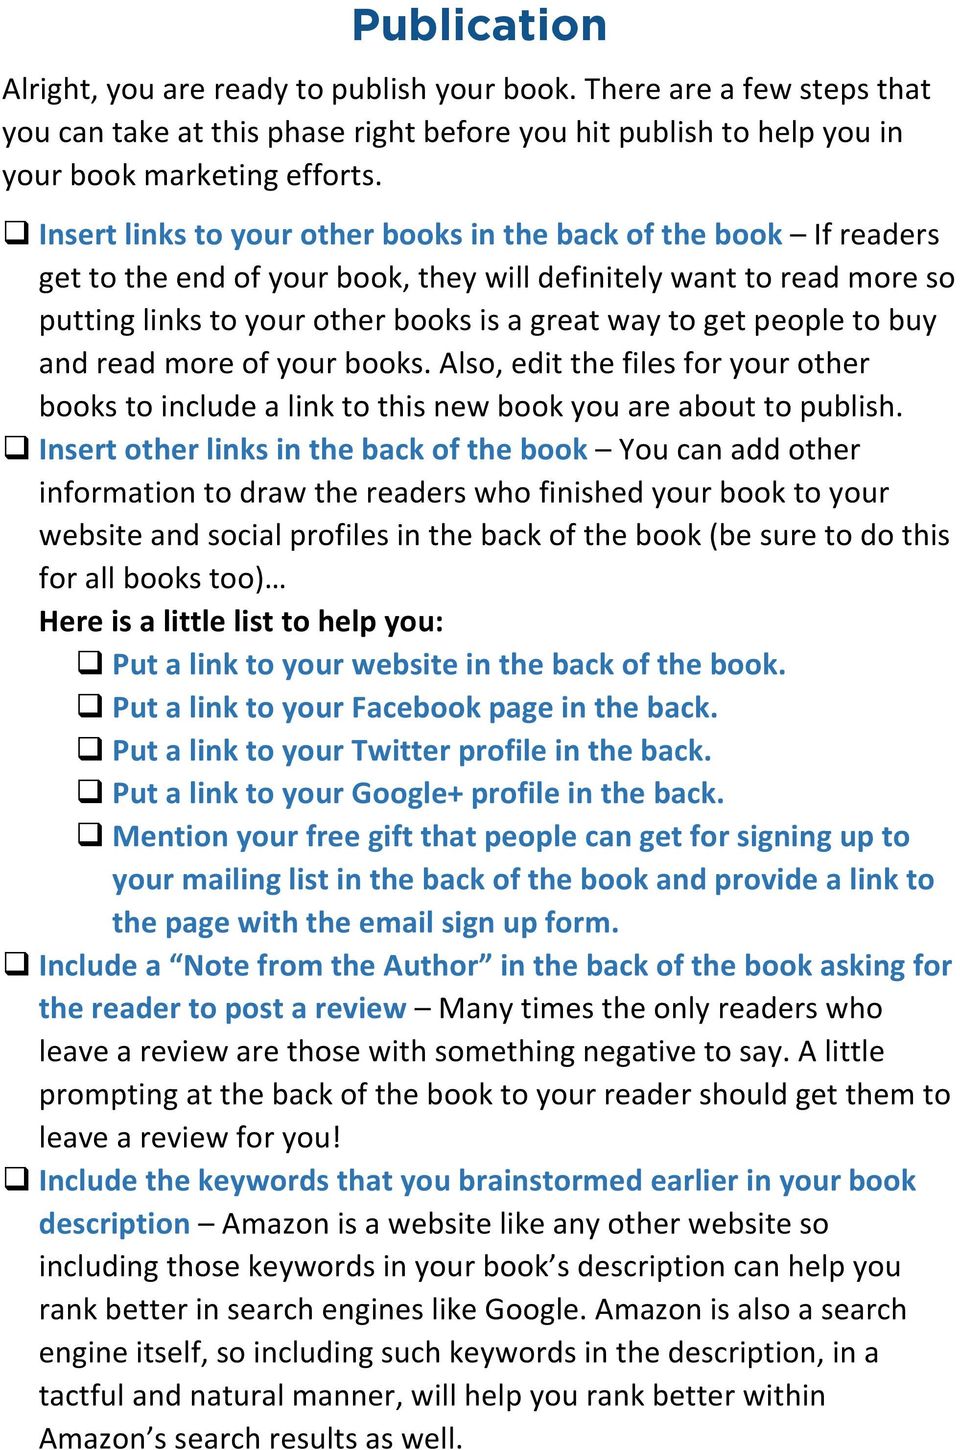 people to buy and read more of your books. Also, edit the files for your other books to include a link to this new book you are about to publish.